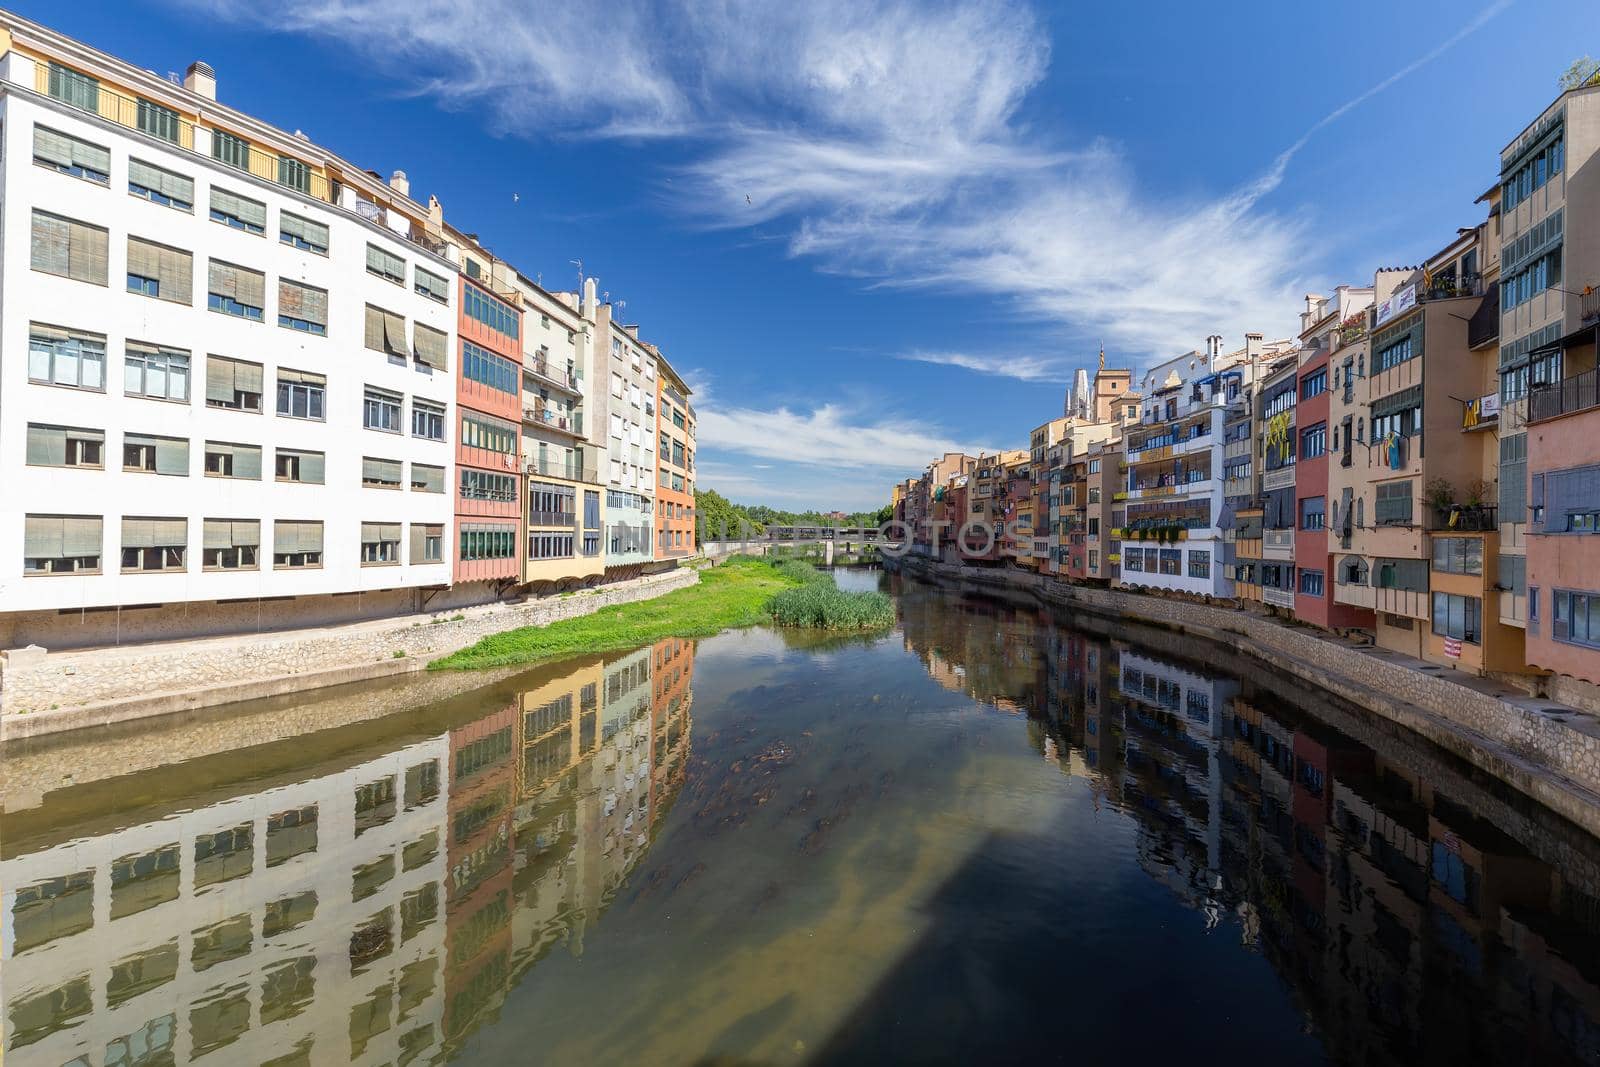 View of the embankment in Girona - Catalonia, Spain by Digoarpi